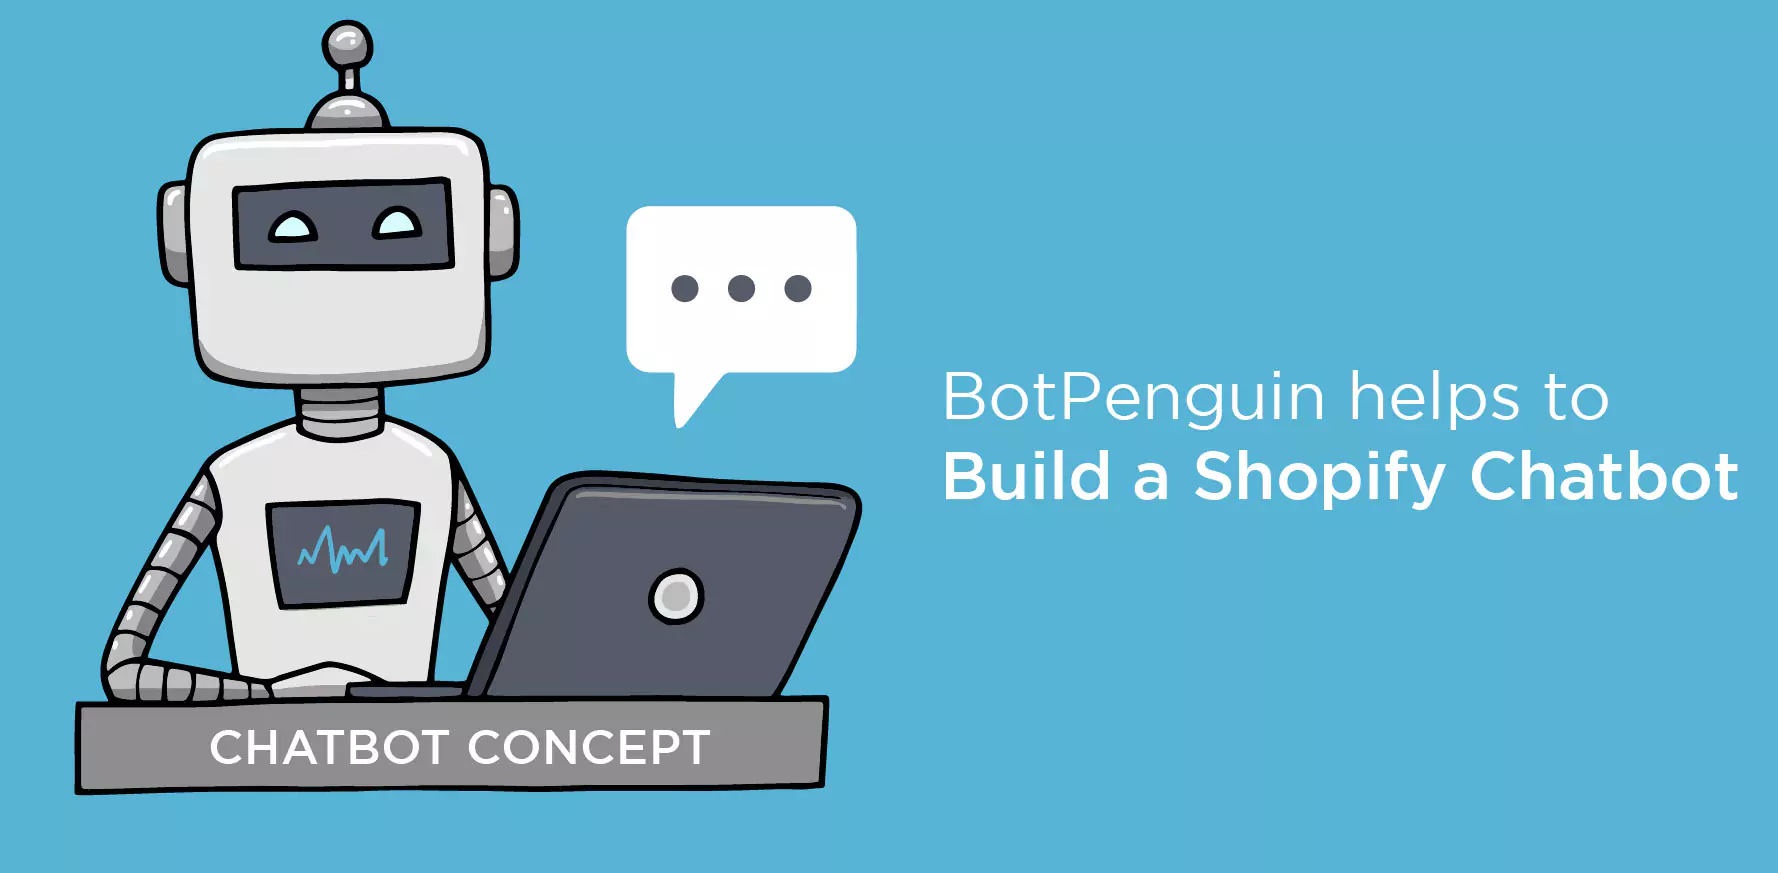 How can BotPenguin help you build a Shopify chatbot?